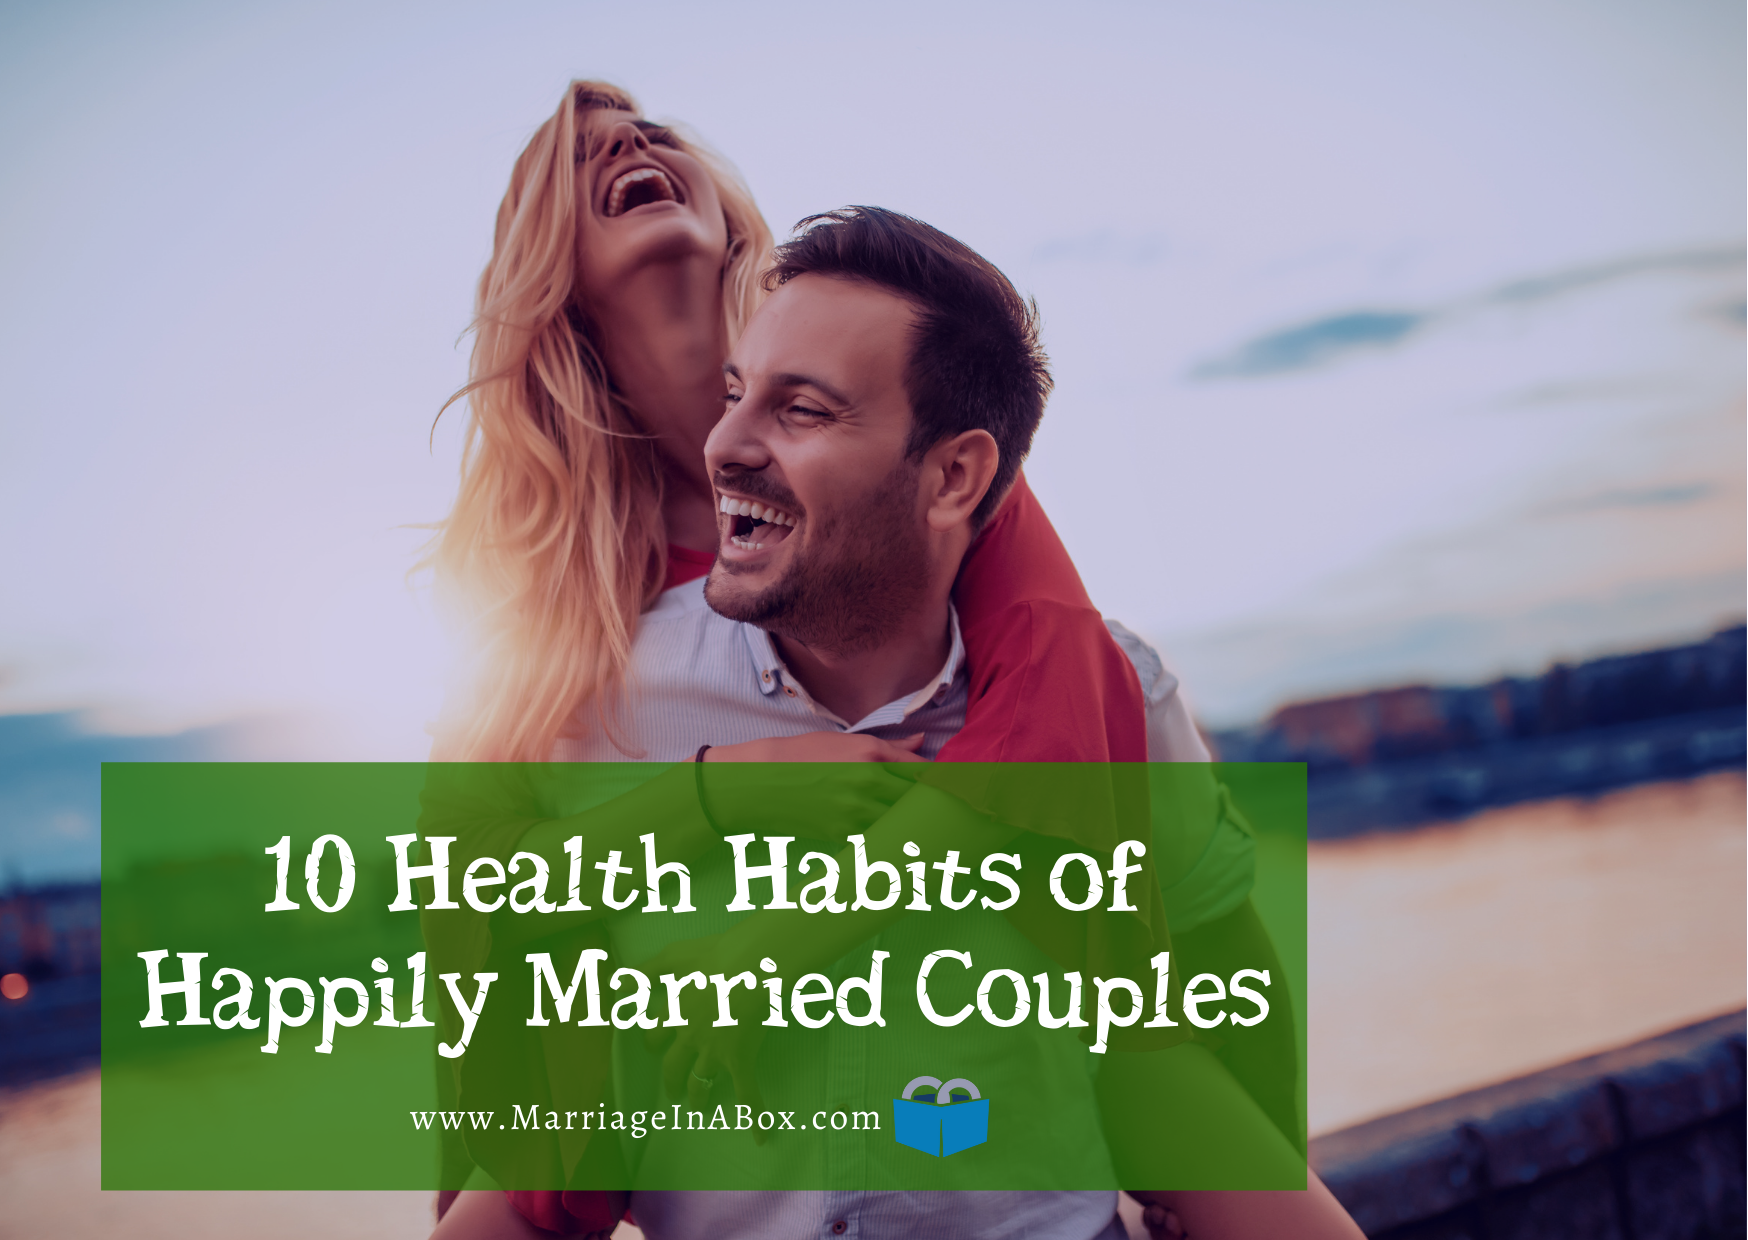 10 Health Habits of Happily Married Couples